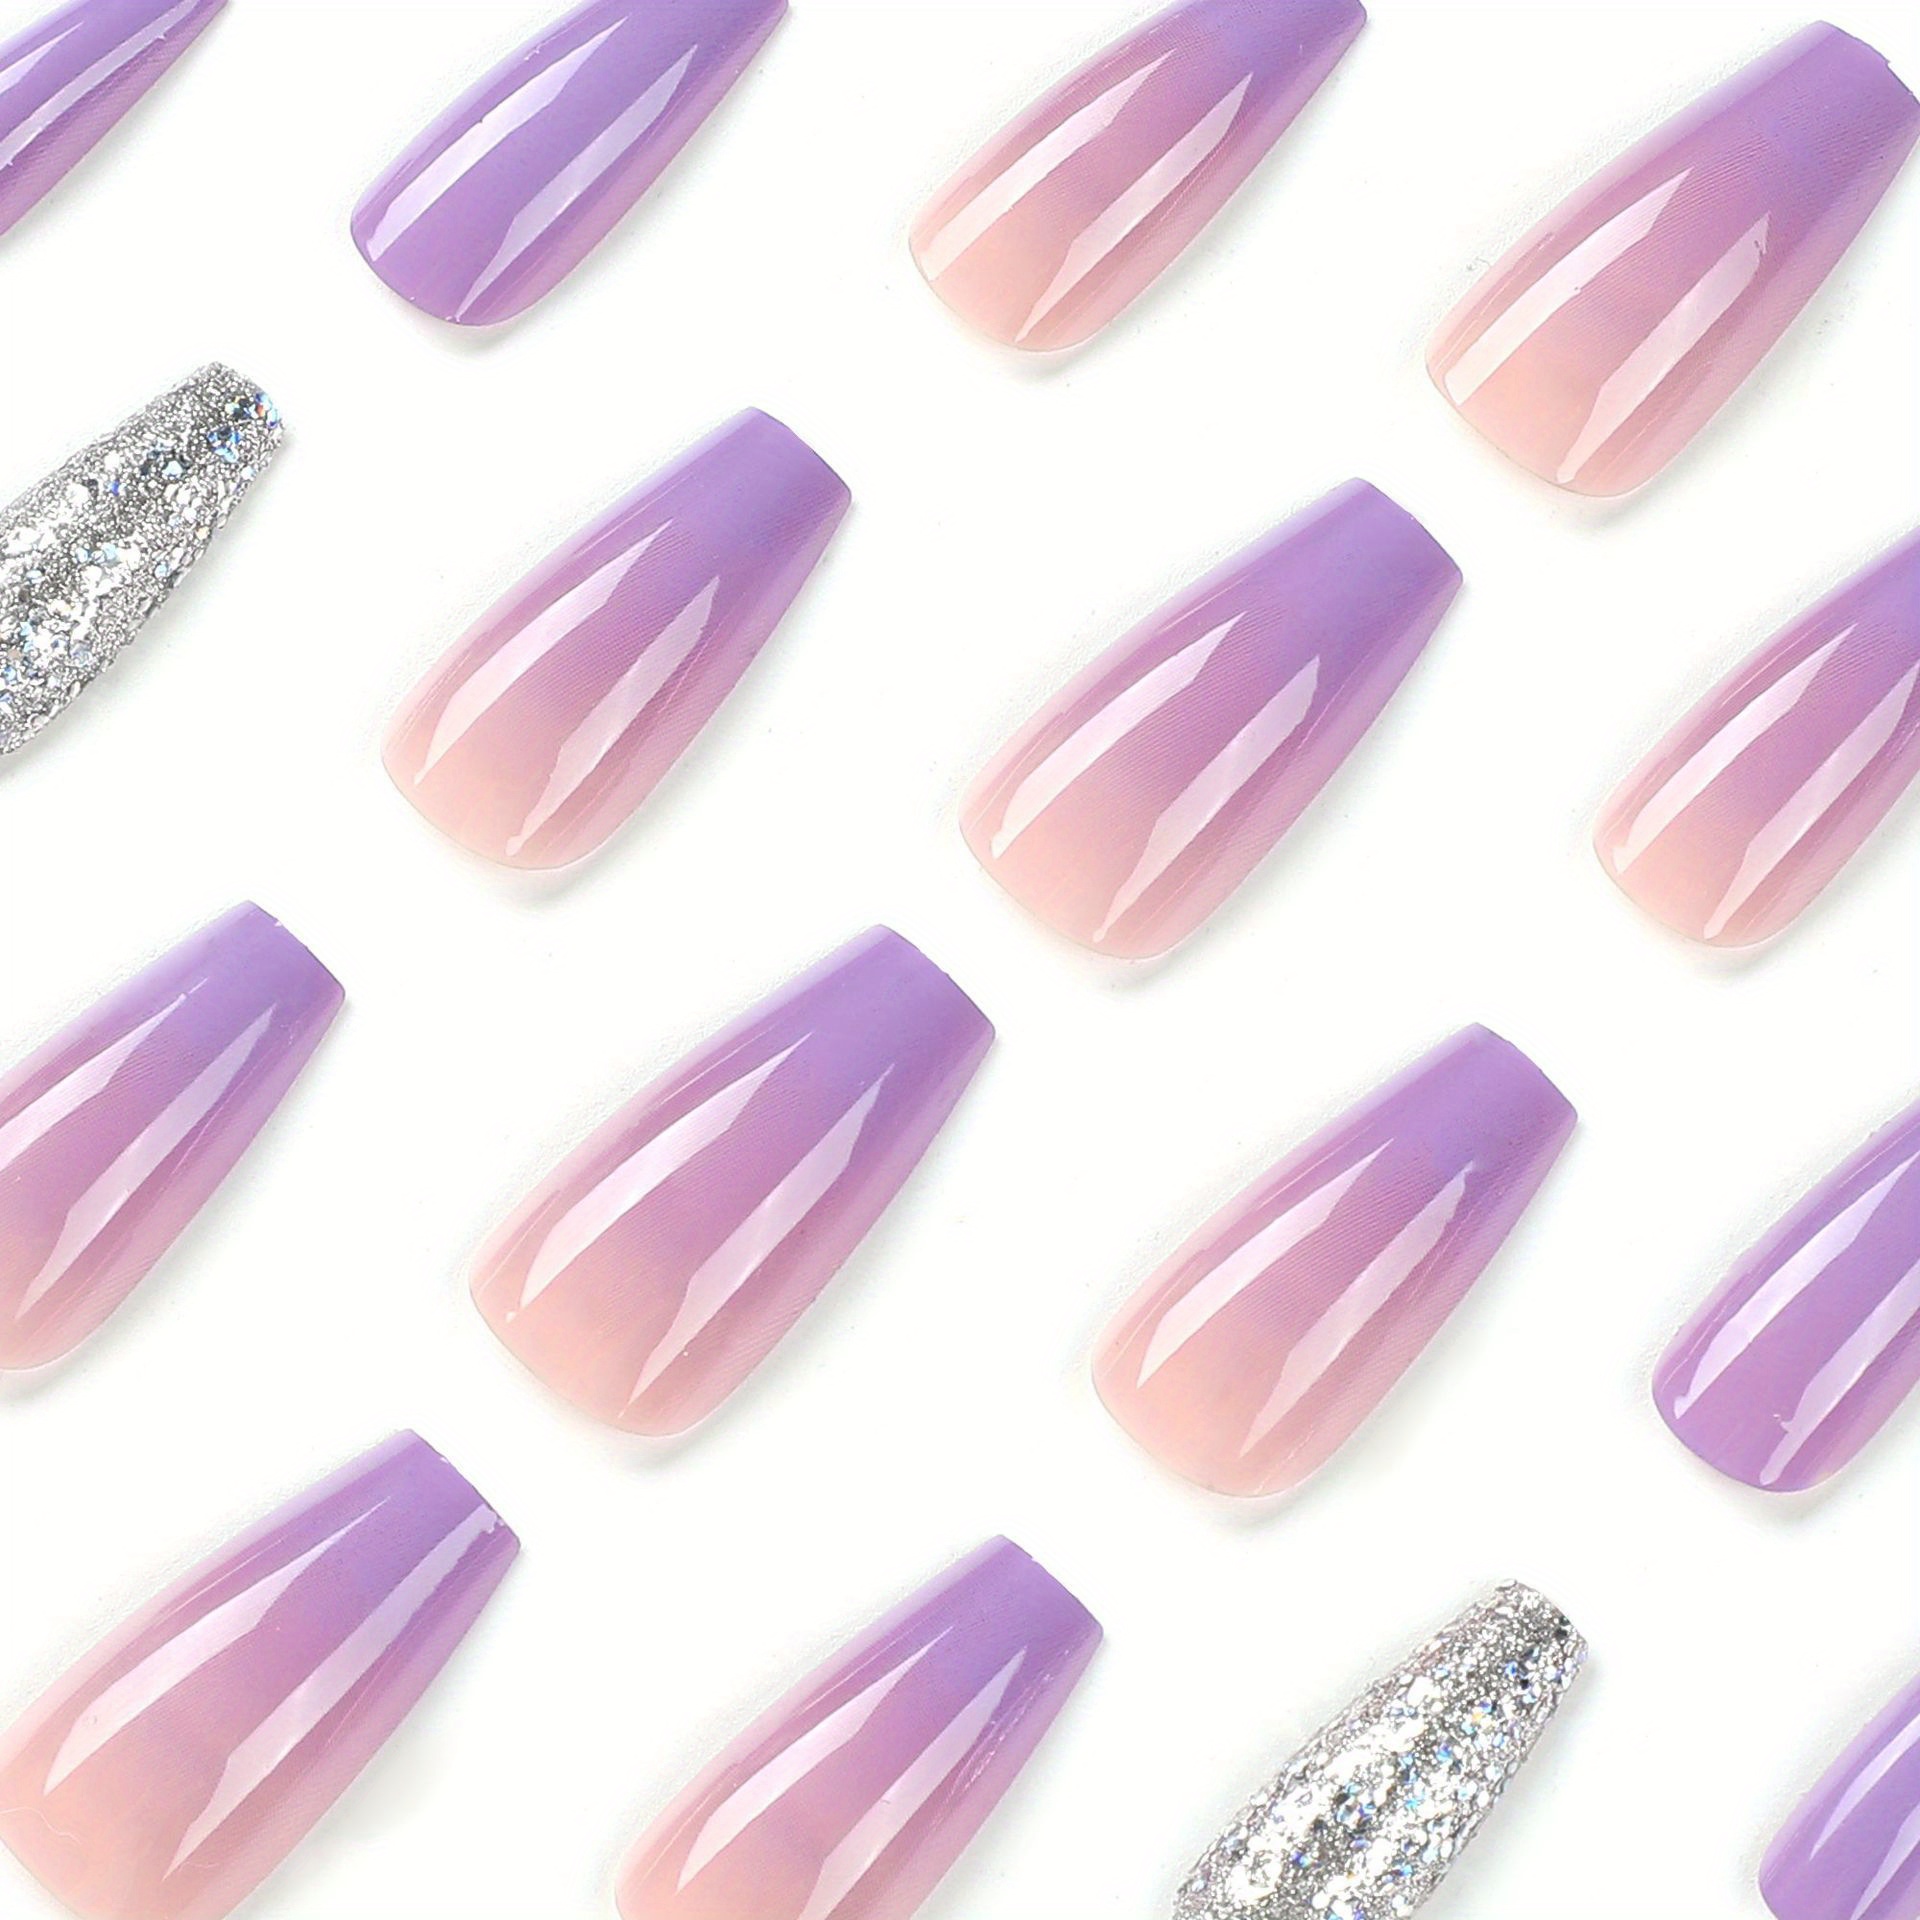 Glam Up Your Look With Long Coffin Fake Nails - Glitter, Star